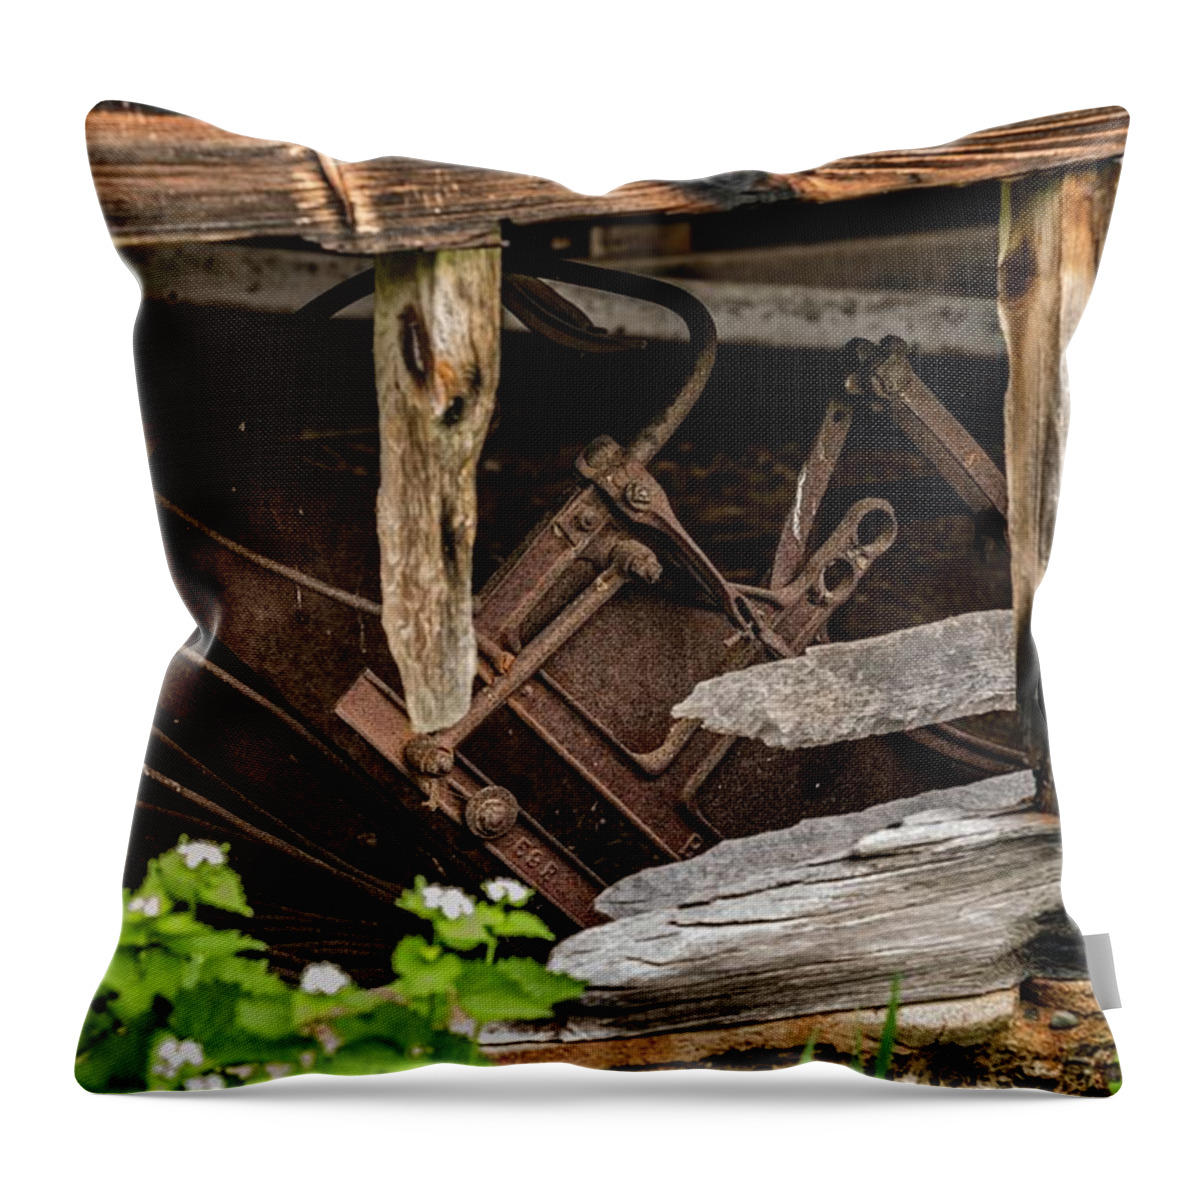  Throw Pillow featuring the photograph Old metal peeking by Pamela Taylor